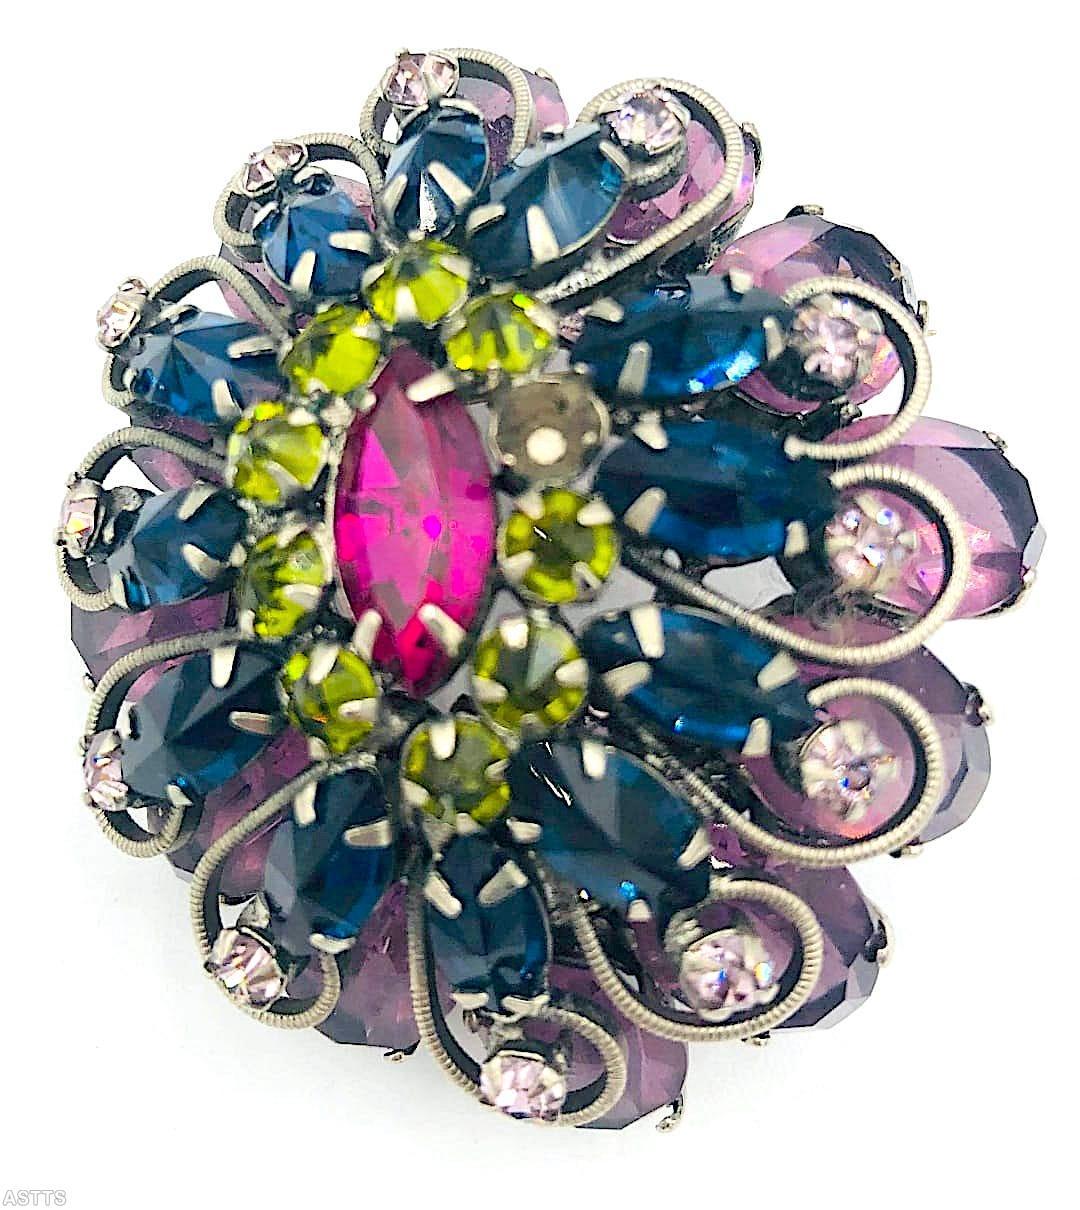 Schreiner scrollwork 2 level domed radial oval pin large navette center 10 surrounding stone lavender faceted large oval stone navy large navette peridot inverted small stone large fuschia navette center silvertone jewelry